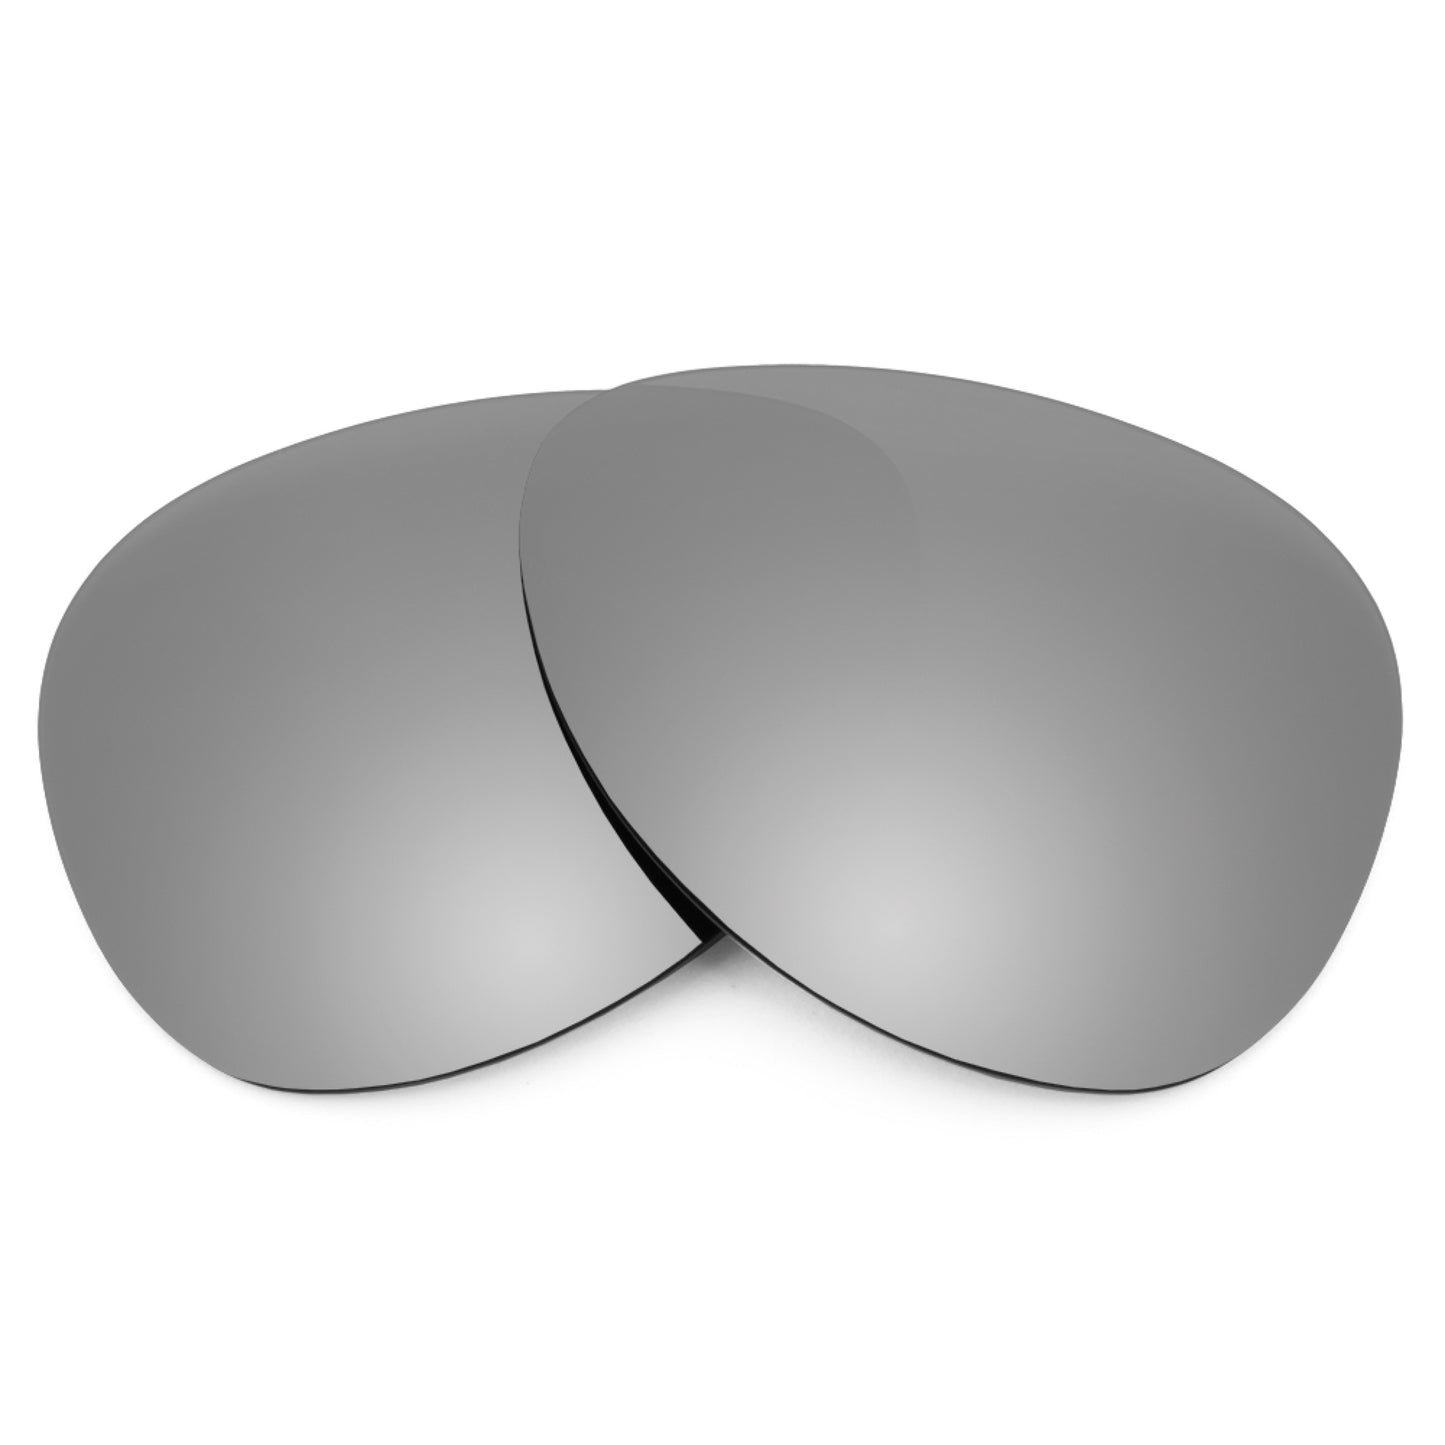 Revant replacement lenses for Ray-Ban Cockpit RB3362 59mm Non-Polarized Titanium